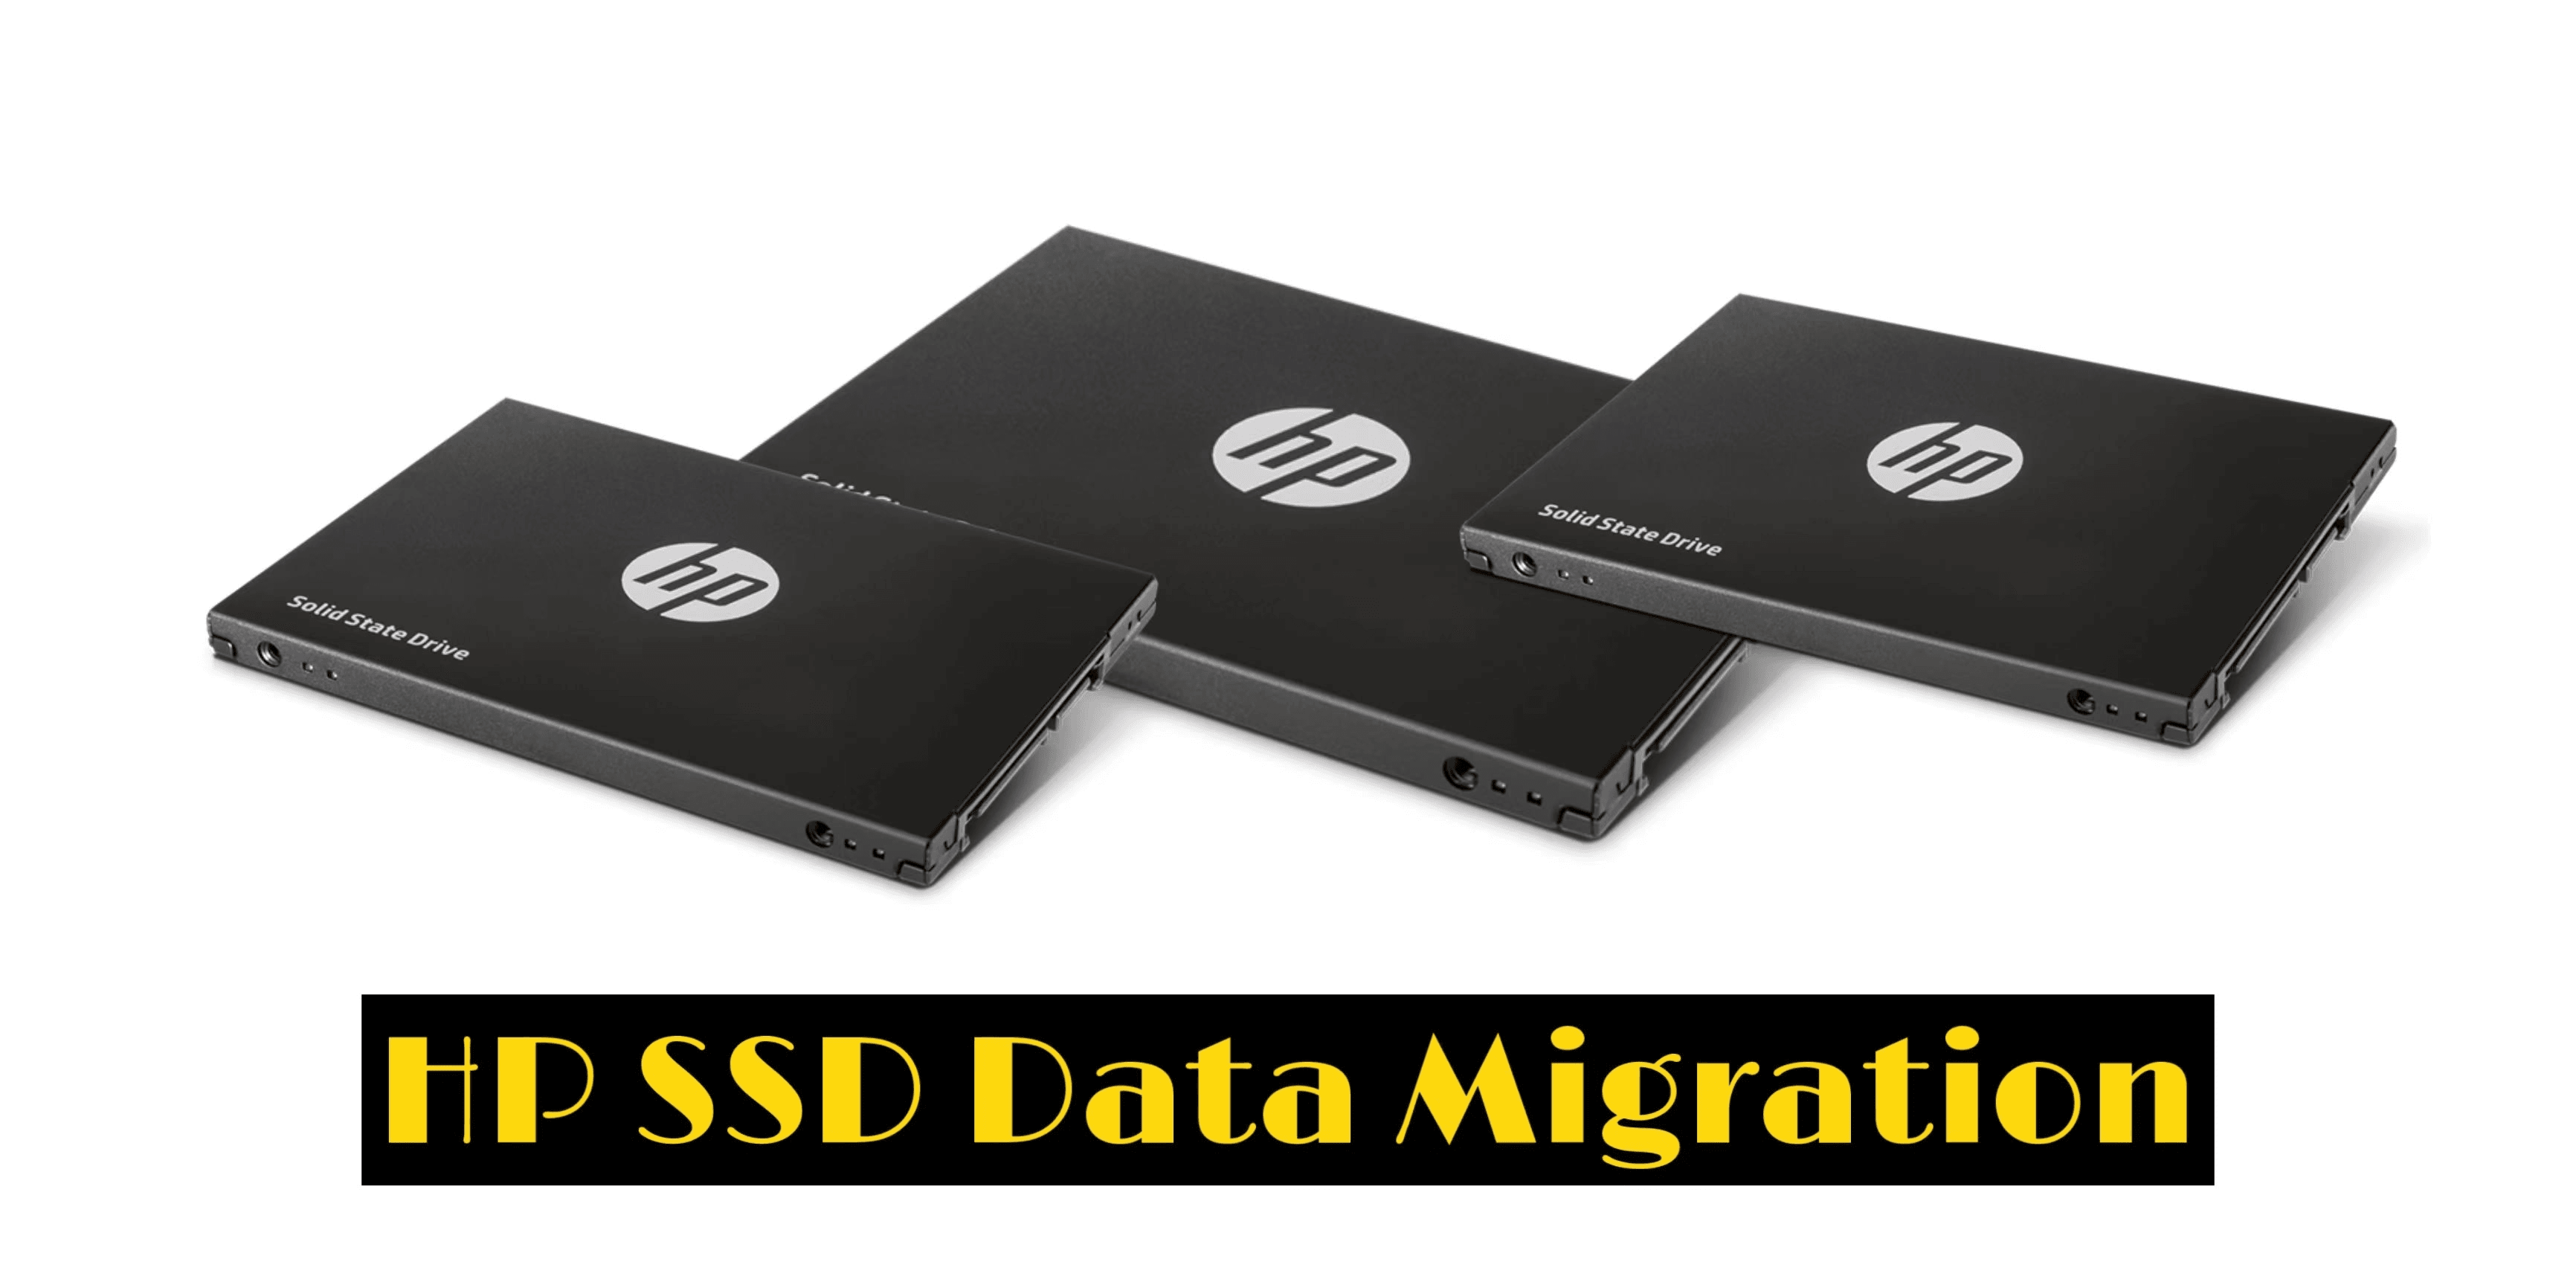 symaskine filosof Vulkan How to Perform HP SSD Data Migration with Best Software